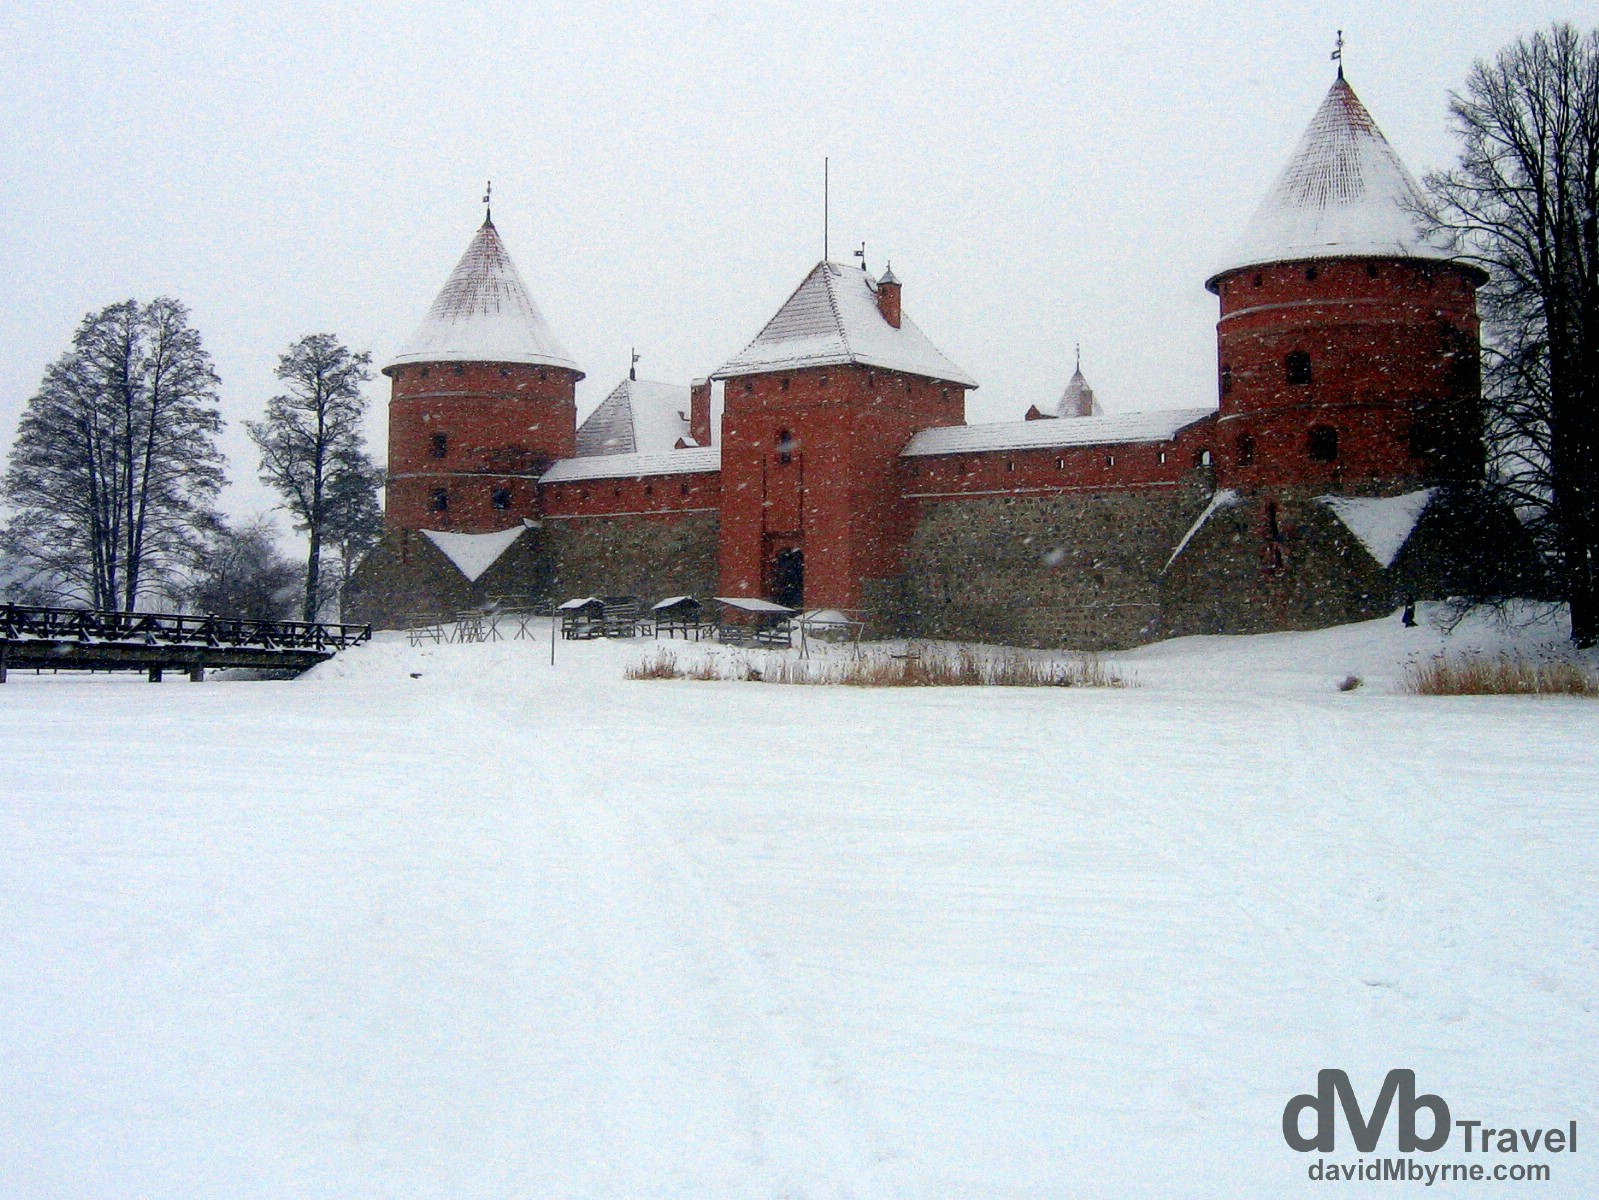 Trakai Castle as seen during a blizzard from the frozen surface of Lake Galv?. Trakai, Lithuania. March 4, 2006.